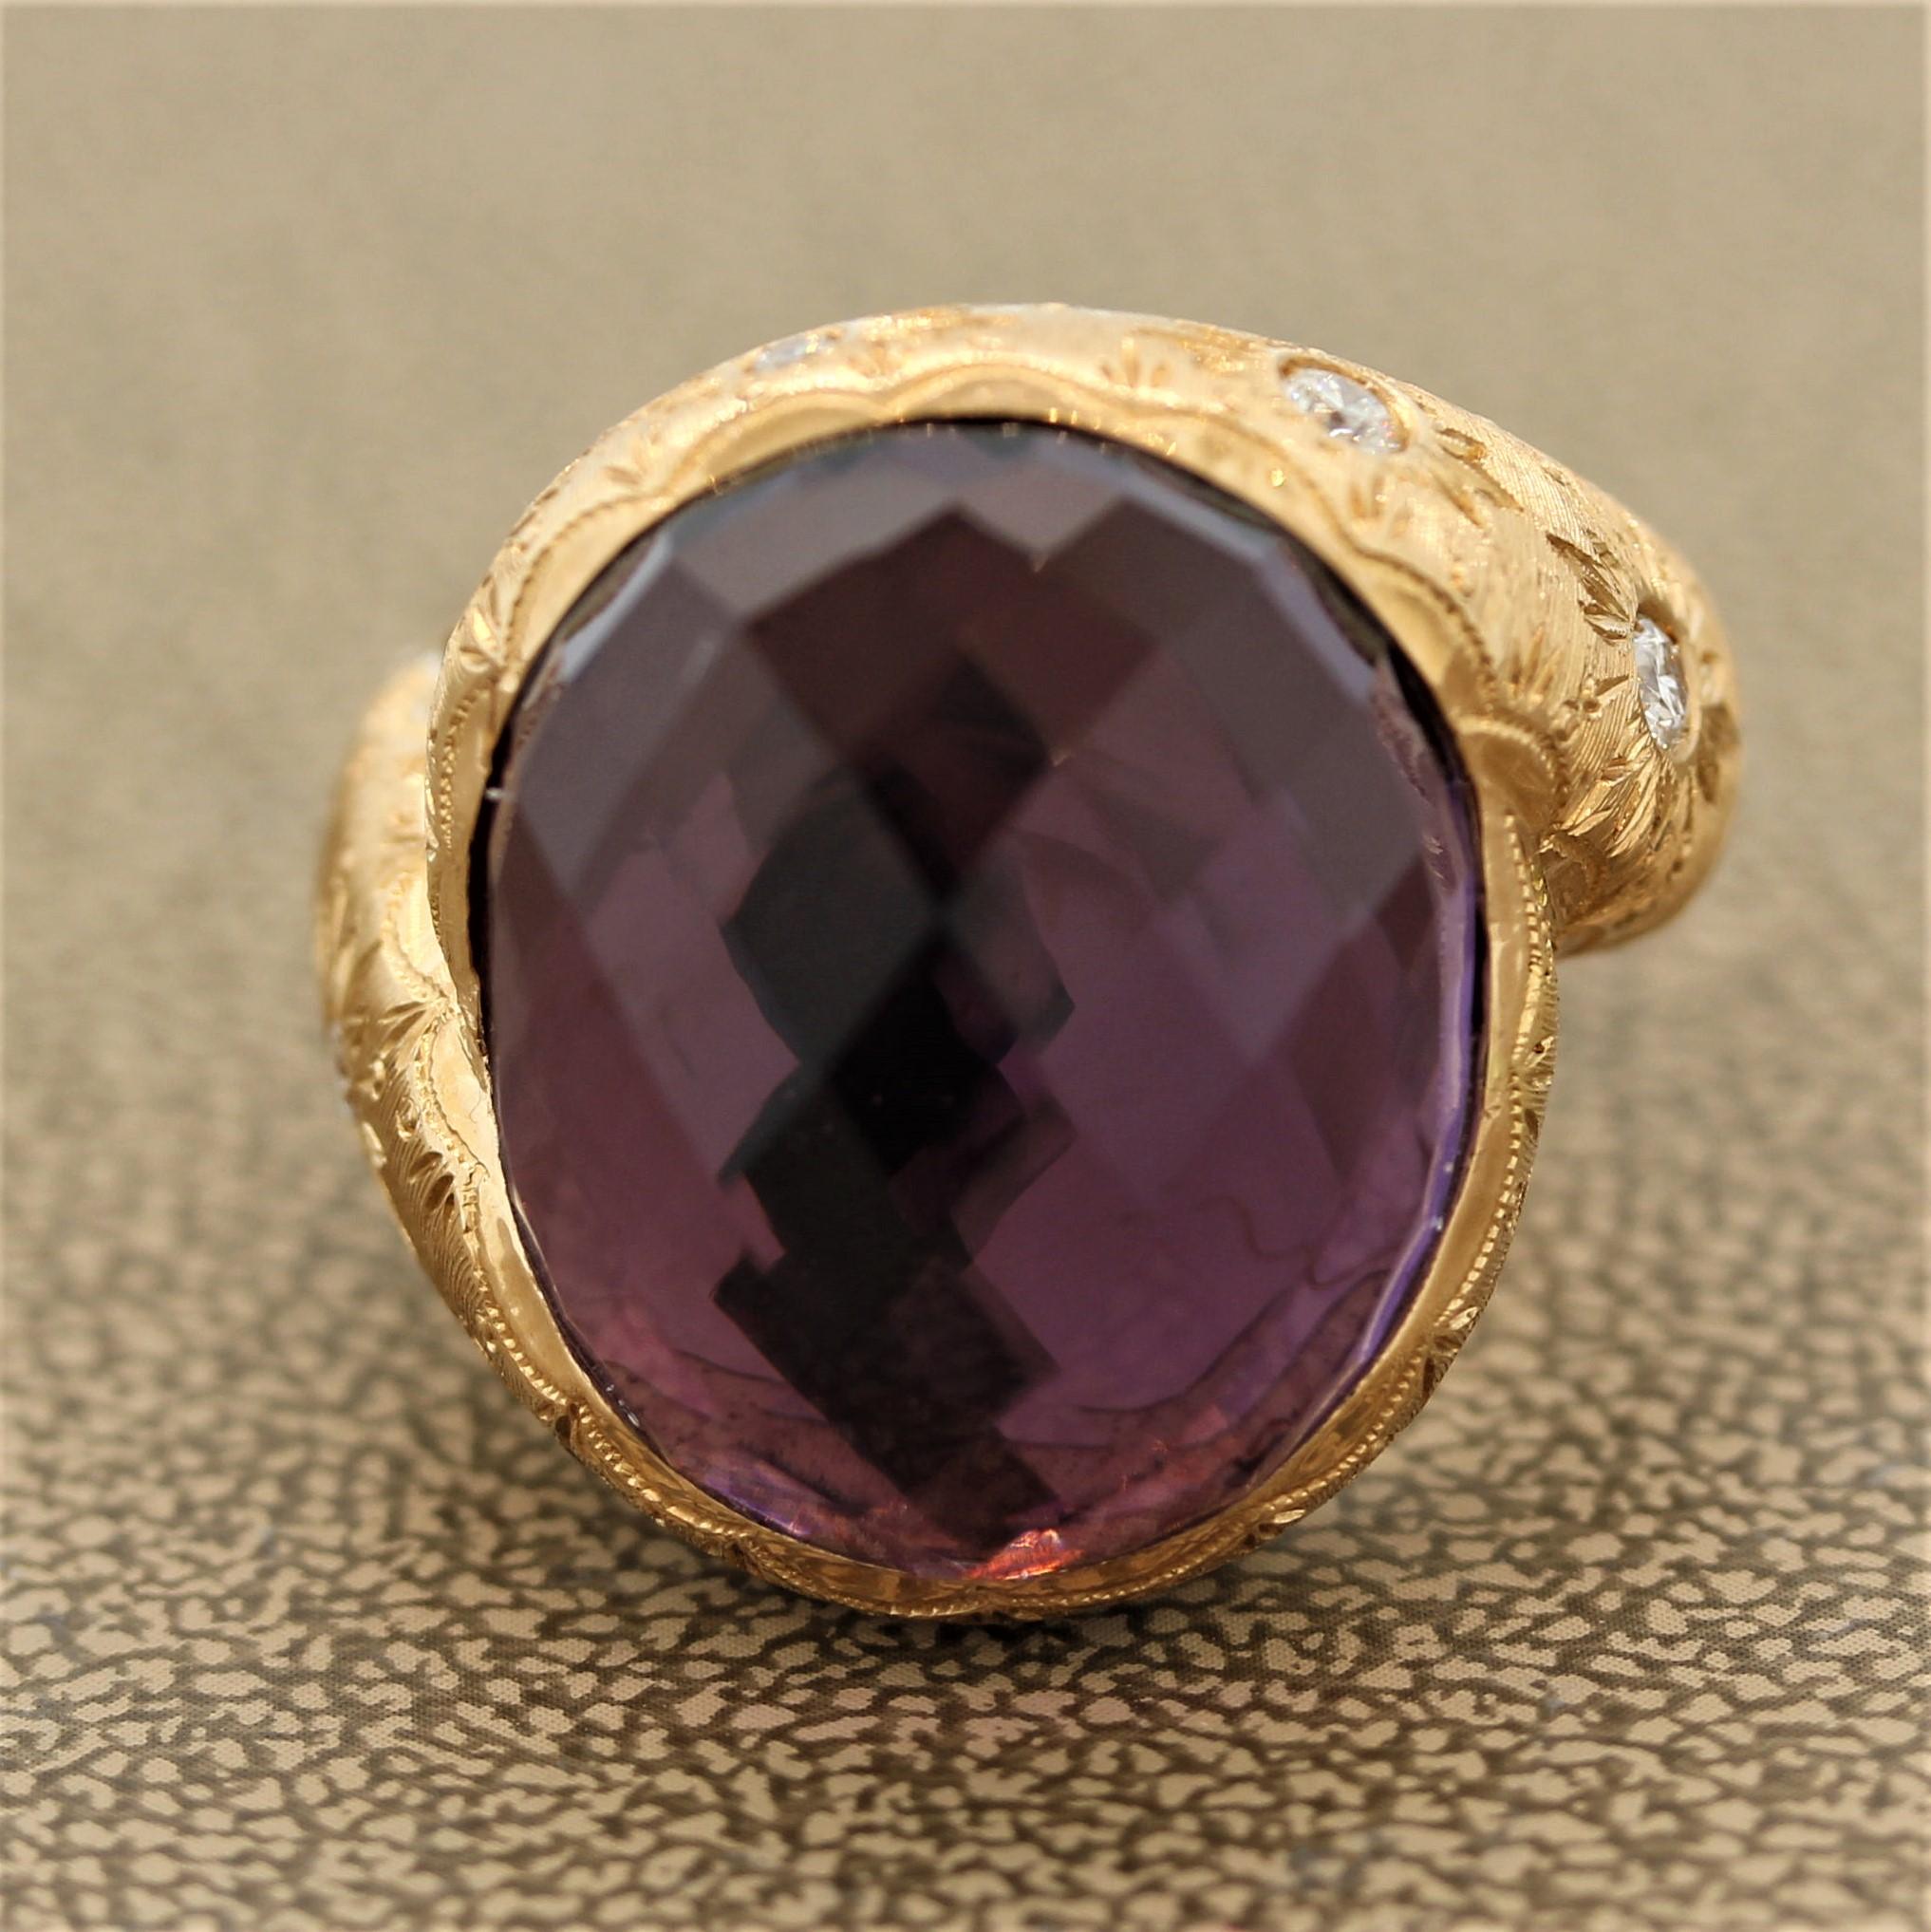 A uniquely styled cocktail ring handcrafted in Italy. It features a 21.50 carat amethyst which is dome shaped and checker-faceted in its top. It is set in a 18k rose gold mounting which has 0.40 carats of round brilliant cut diamonds set around it.